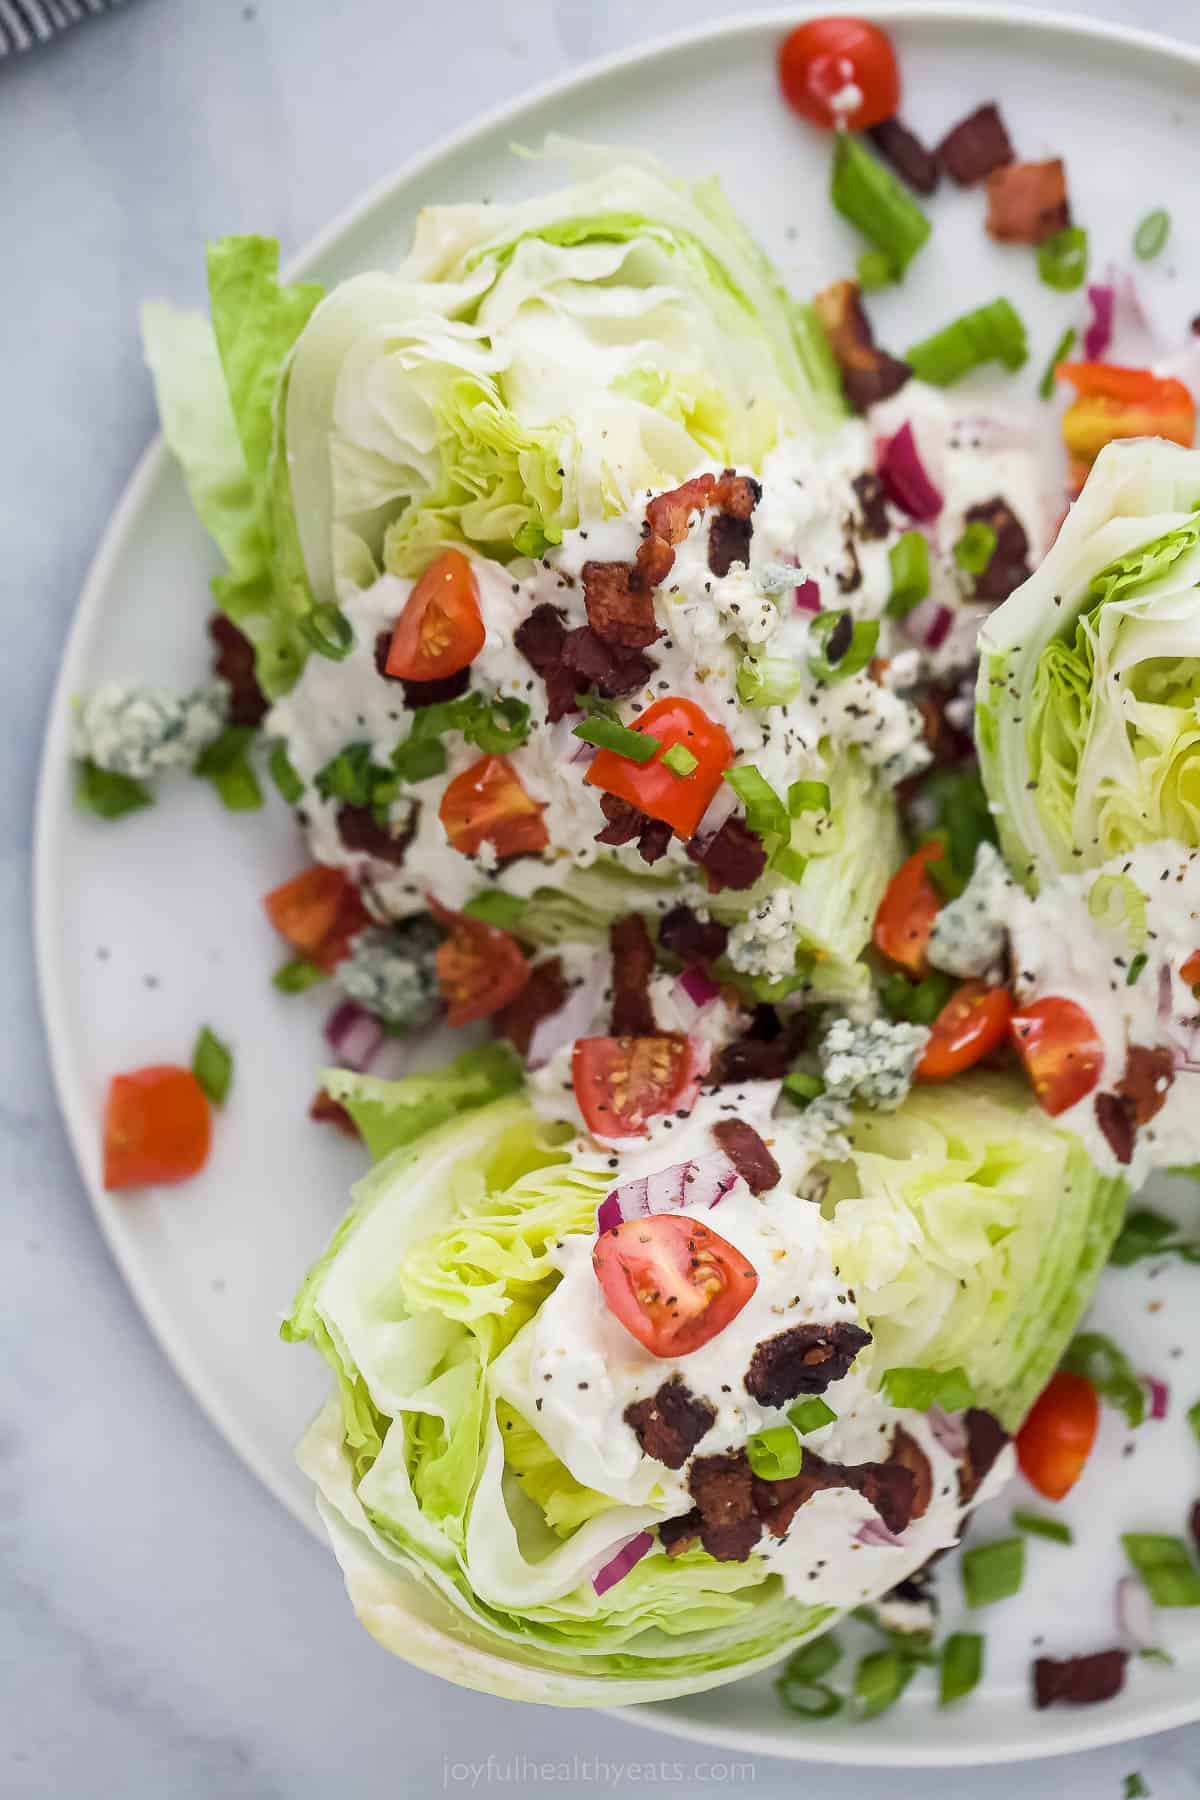 Wedge Salad with iceberg lettuce, tomatoes, bacon, red onions and creamy dressing